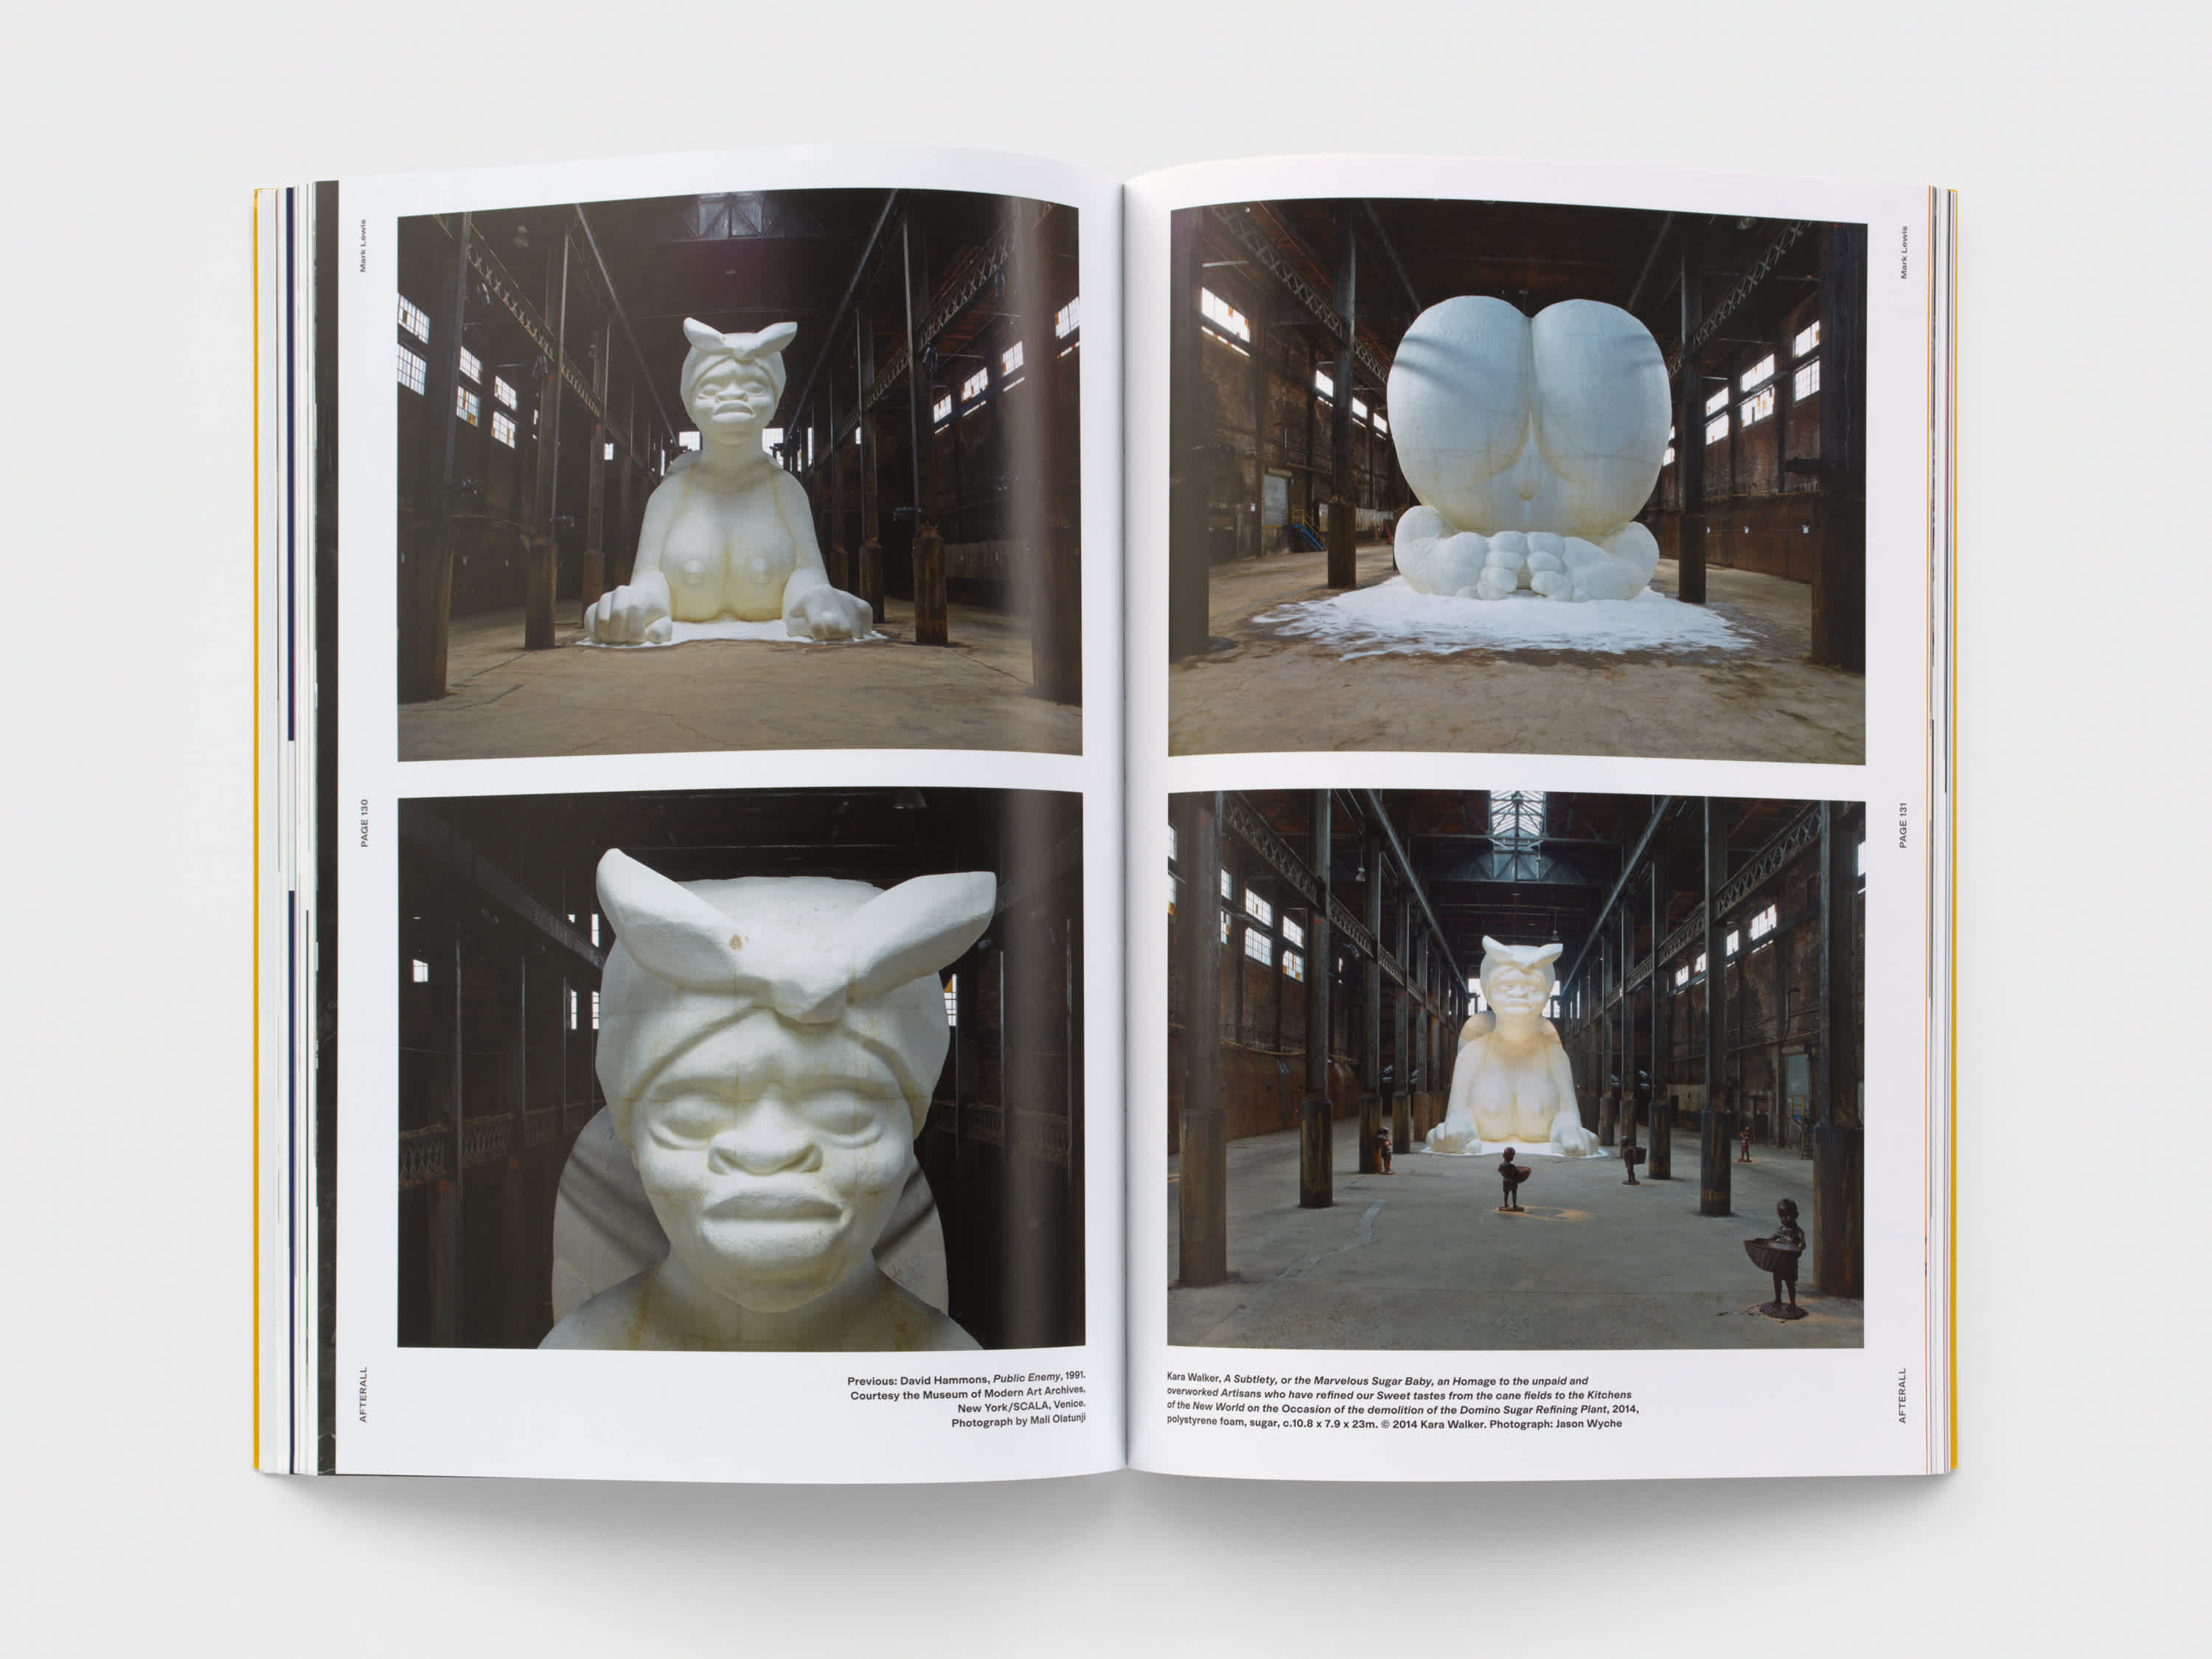  Open magazine with two images on the top and bottom of the left and right pages. The images are of a large-scale sculpture of a woman in a Sphinx position. The sculpture is white and fills the room  in which it's placed. 